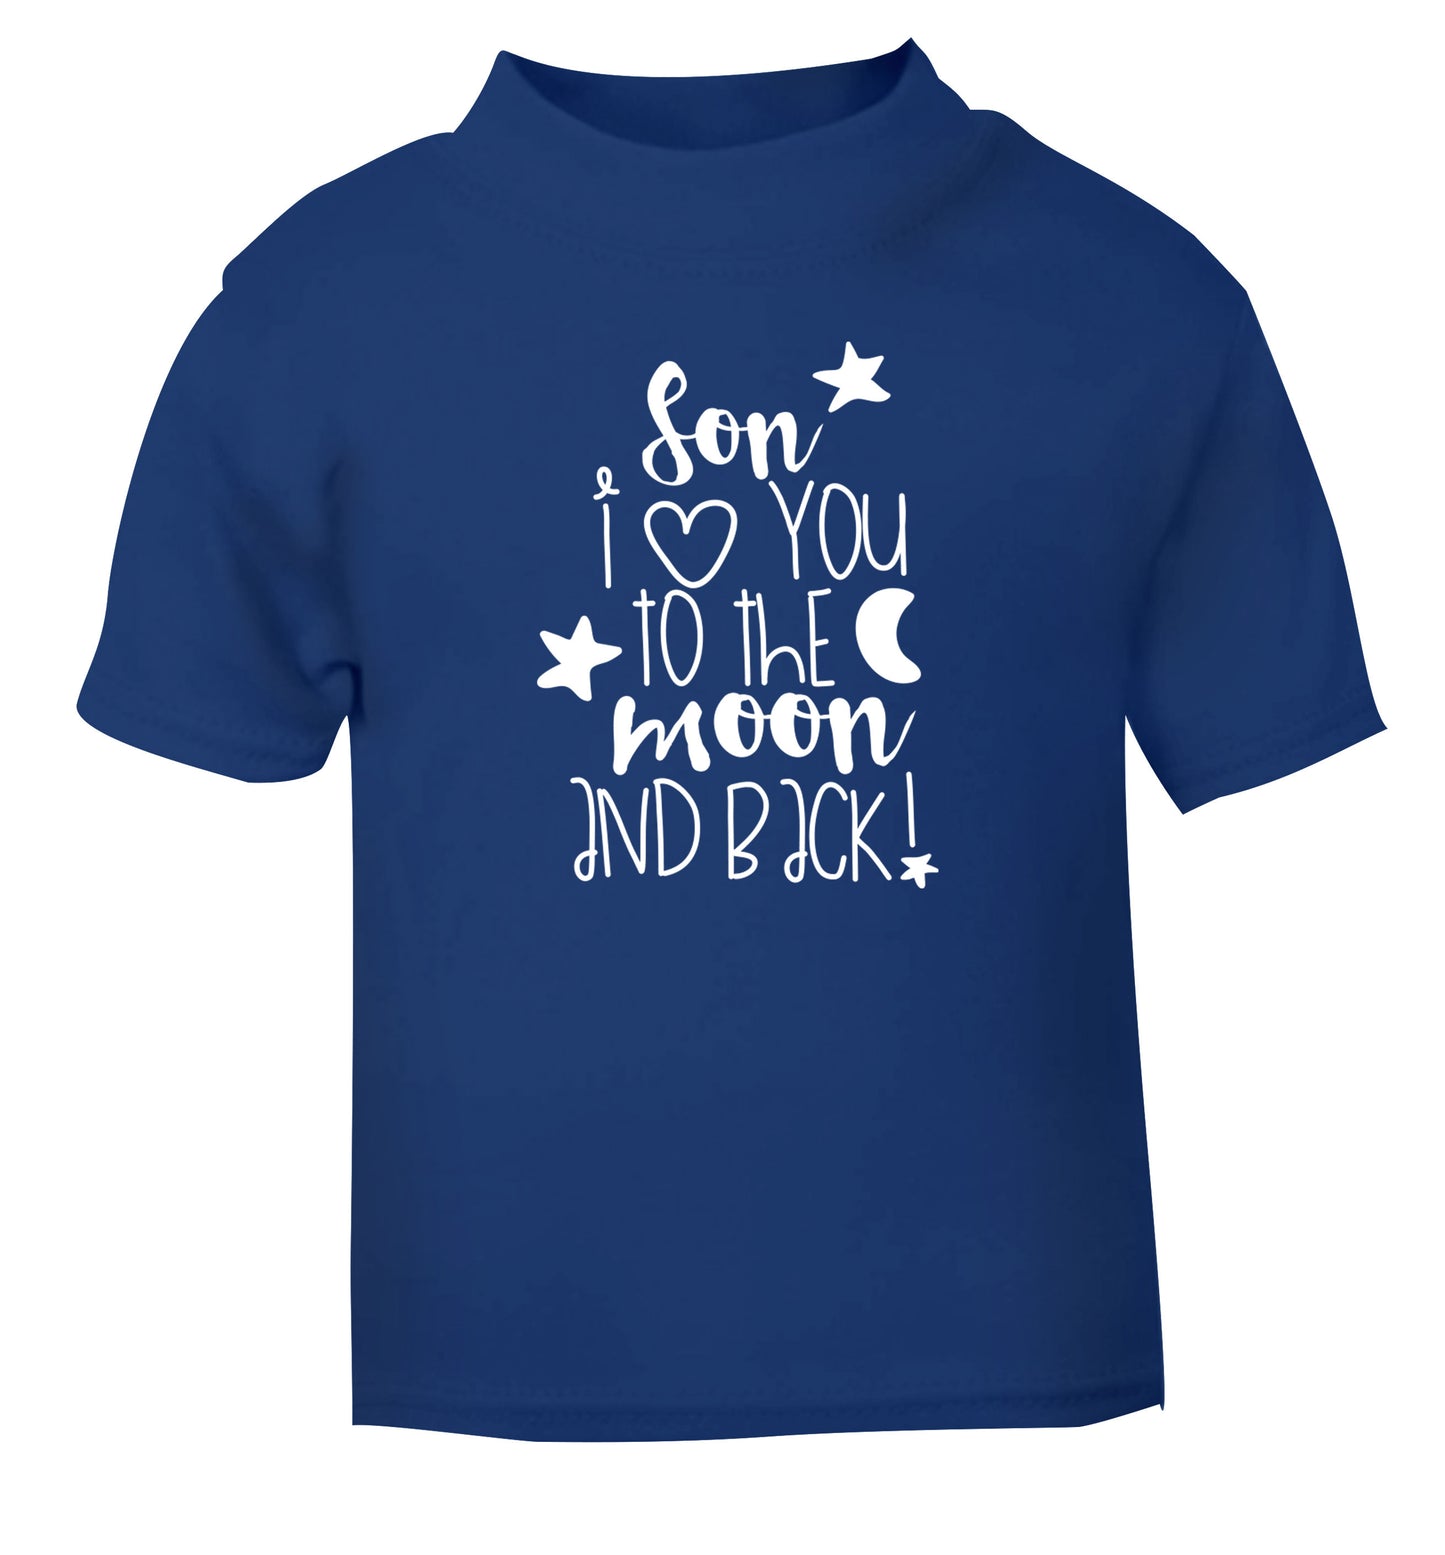 Son I love you to the moon and back blue Baby Toddler Tshirt 2 Years